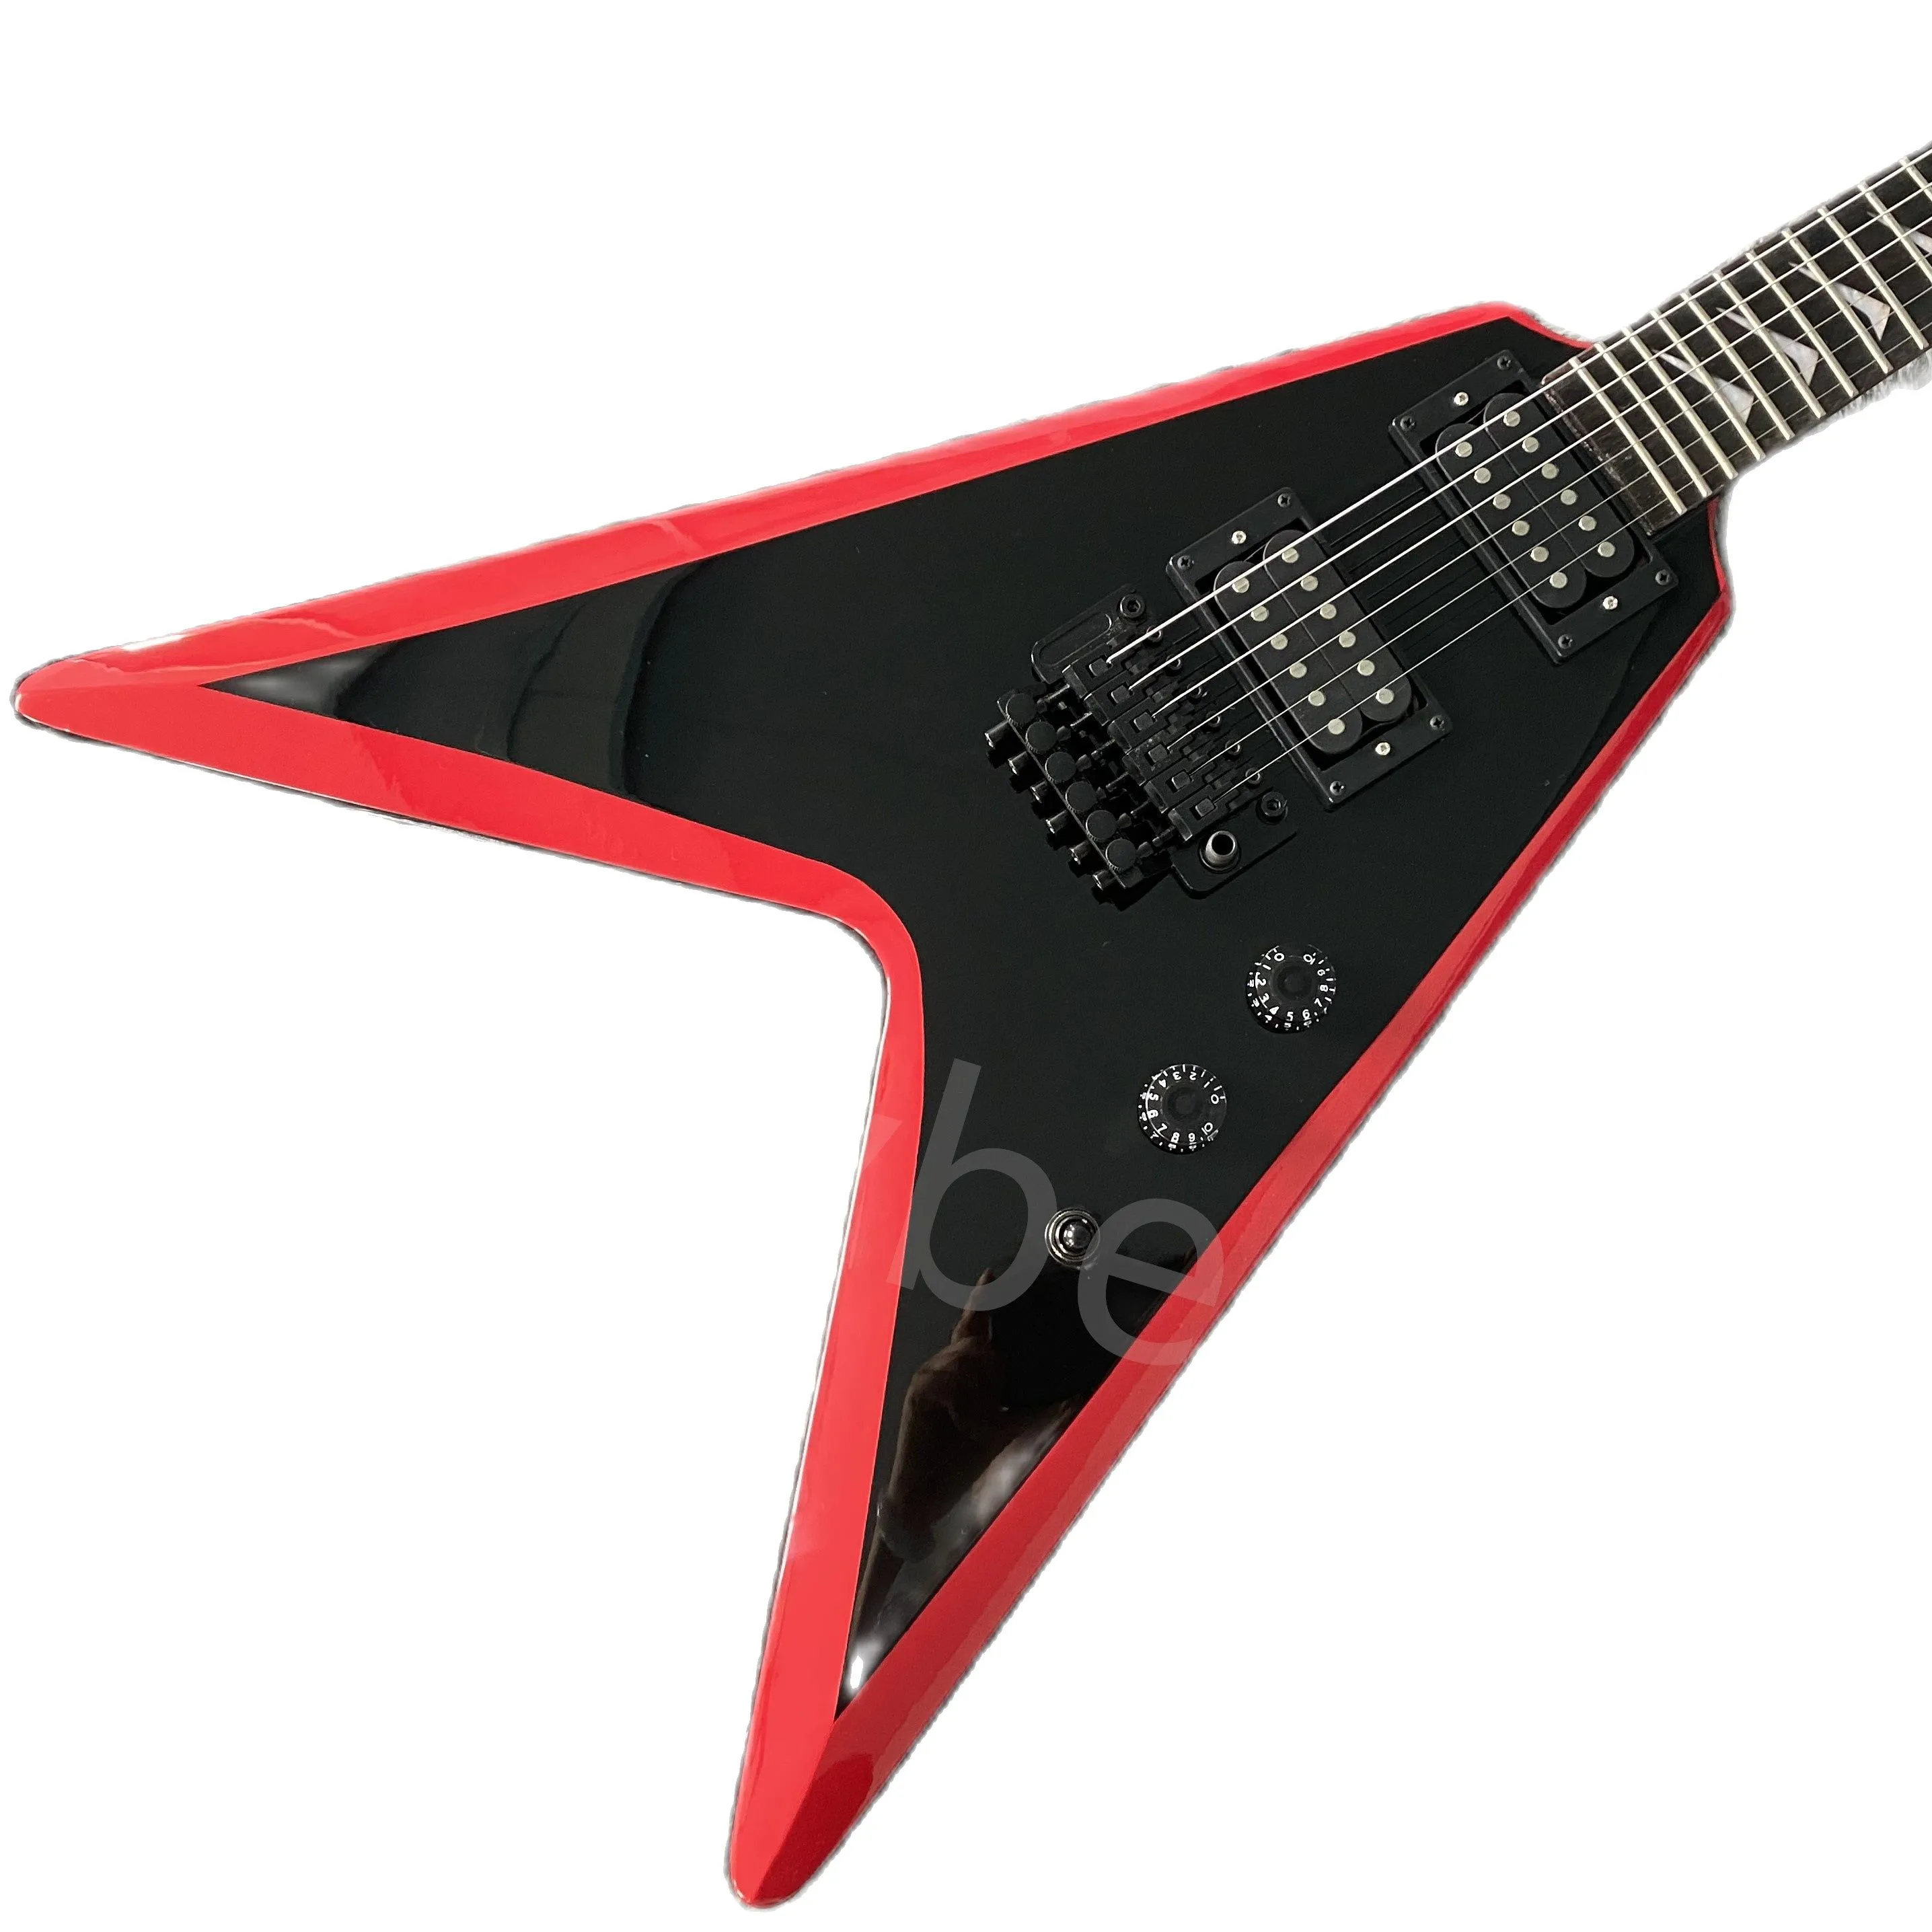 Lvybest China Electric Guitar Article Black And Red The Plane Shape Factory Direct Sales Can Be Customized